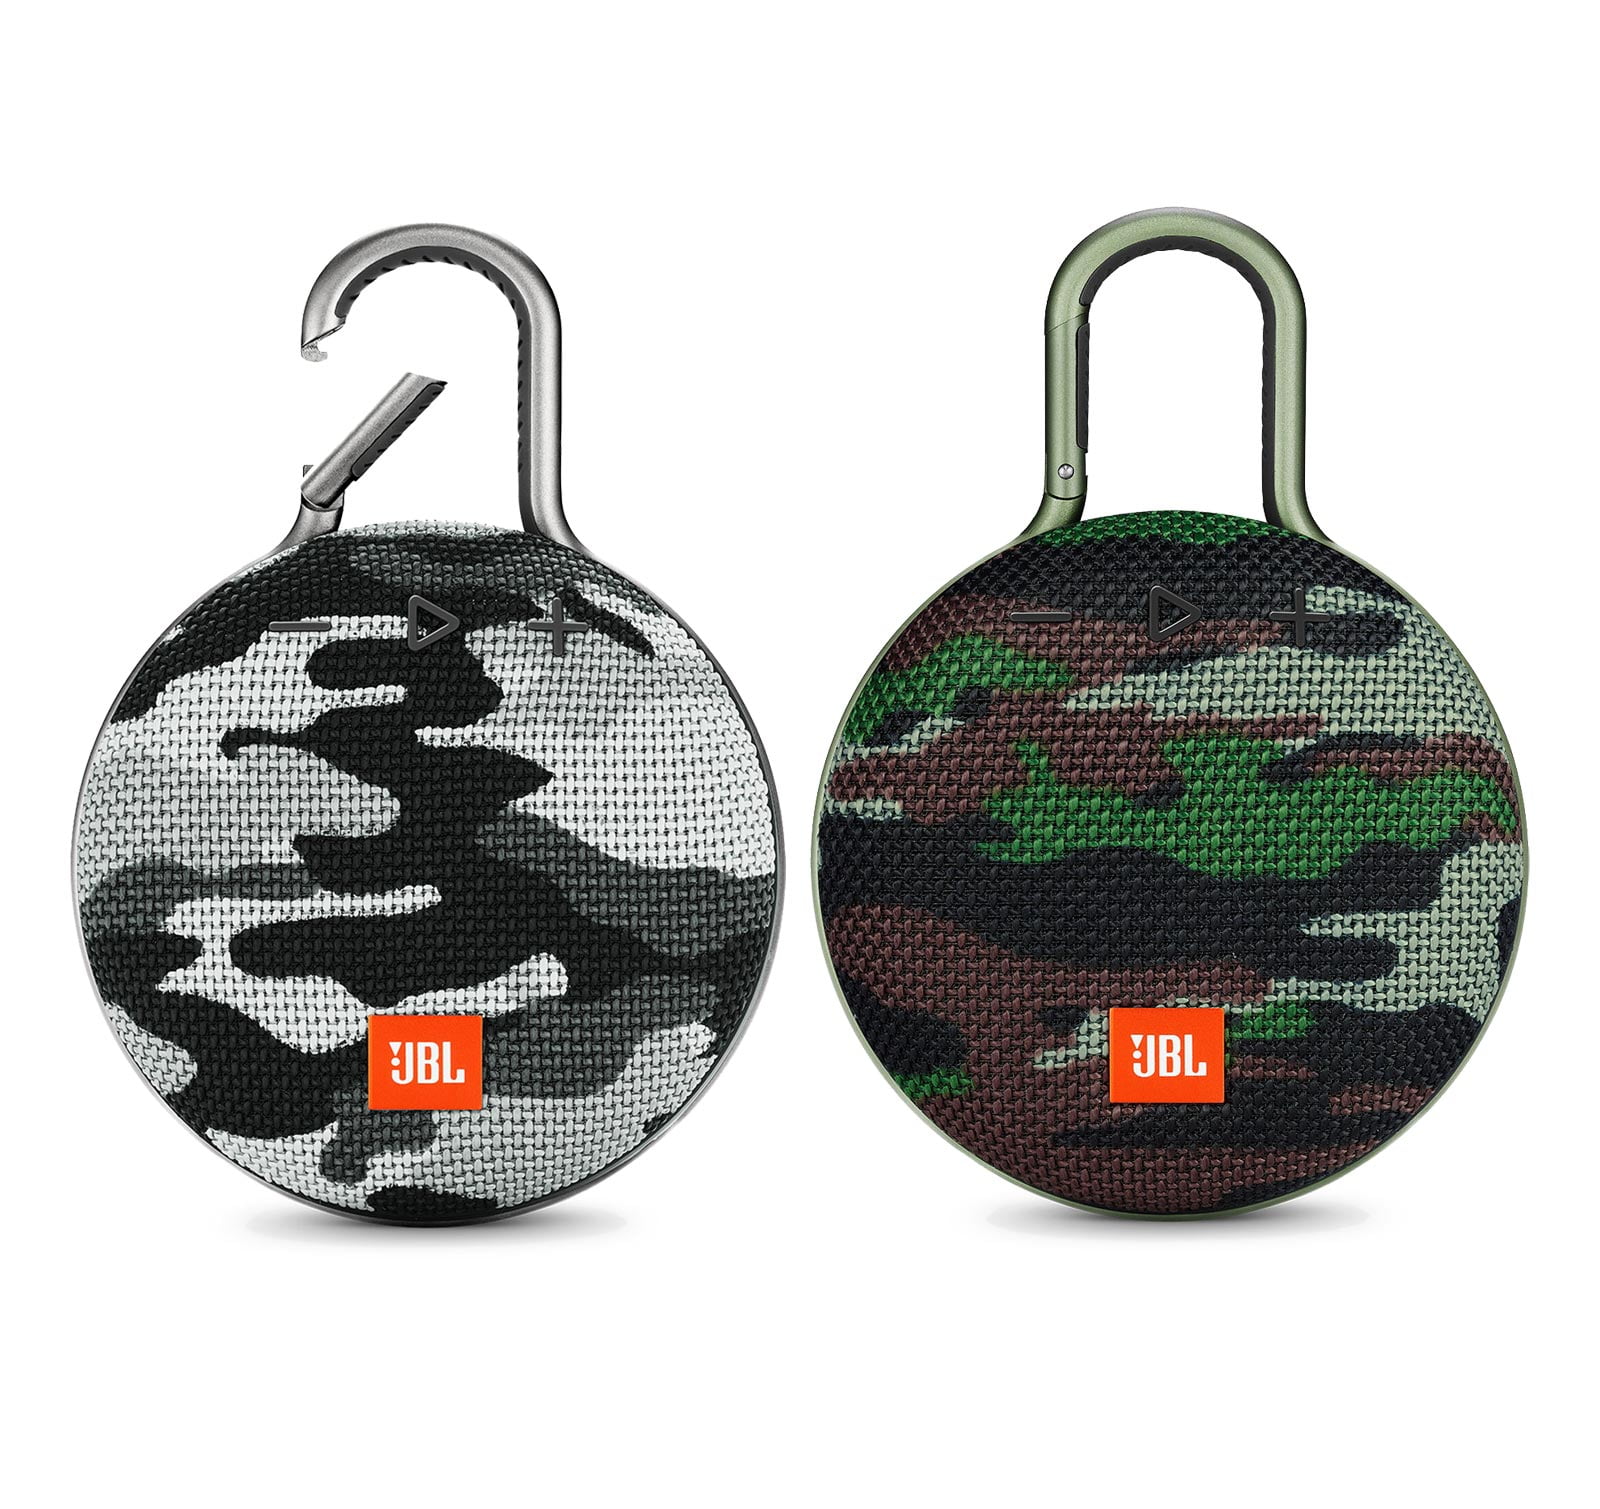 JBL Clip 3 Camouflage and Black Camo Portable Bluetooth Speaker Pair Kit 